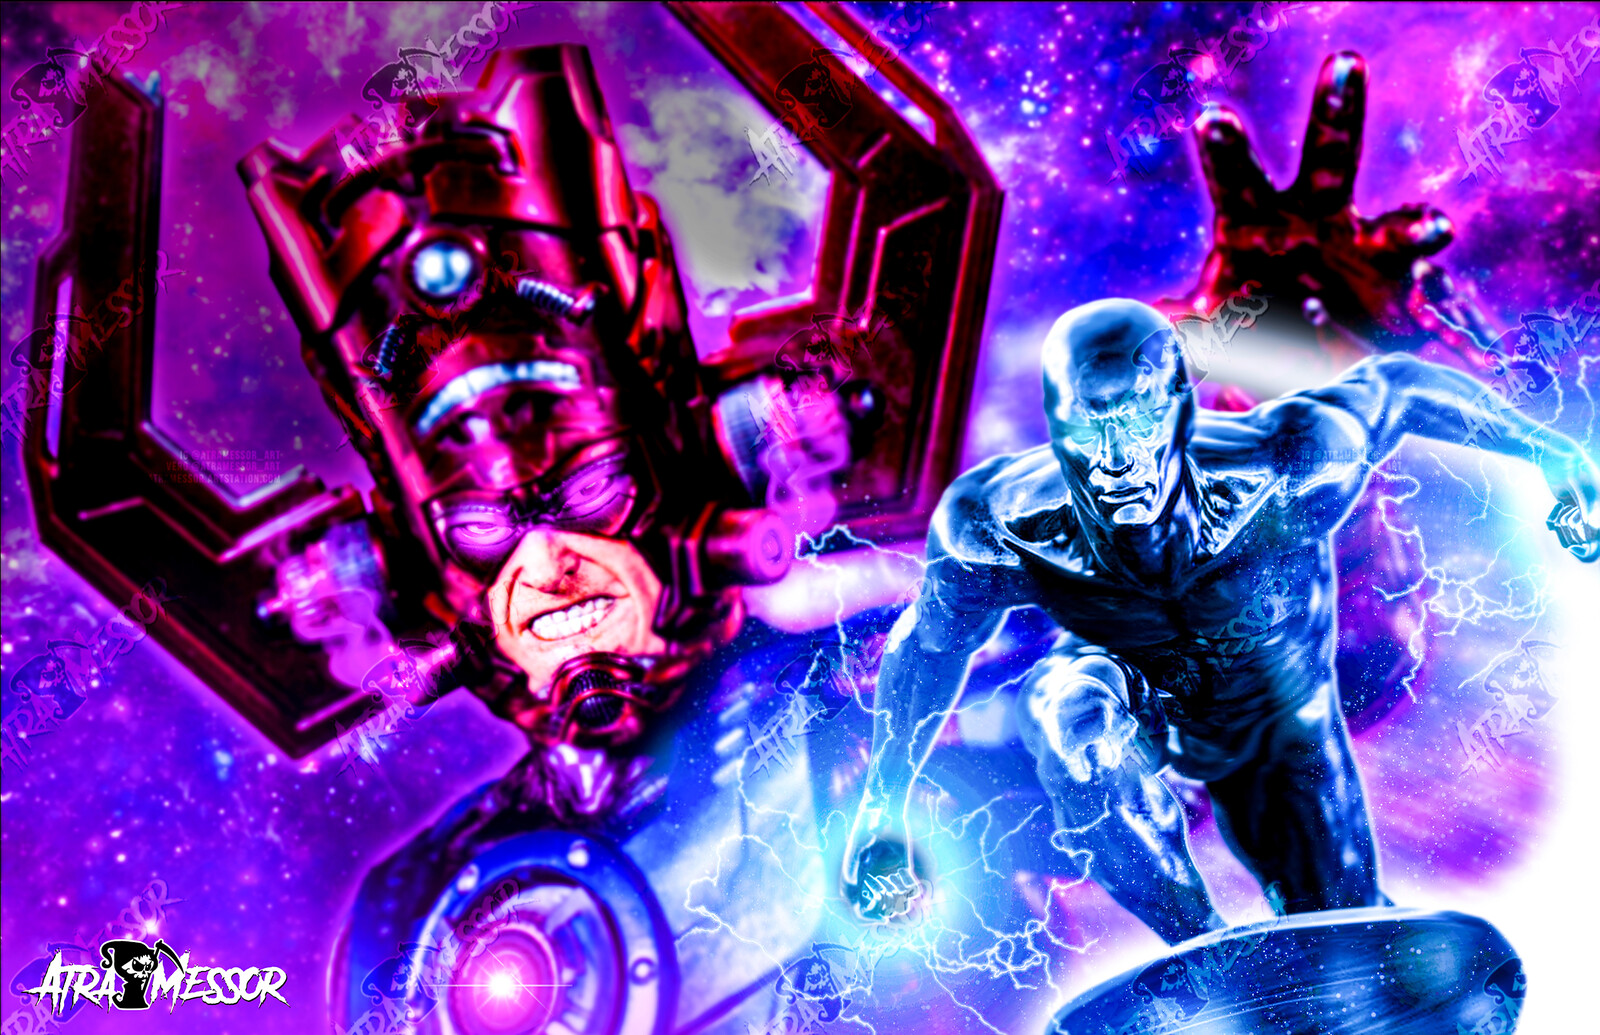 Galactus and Silver Surfer